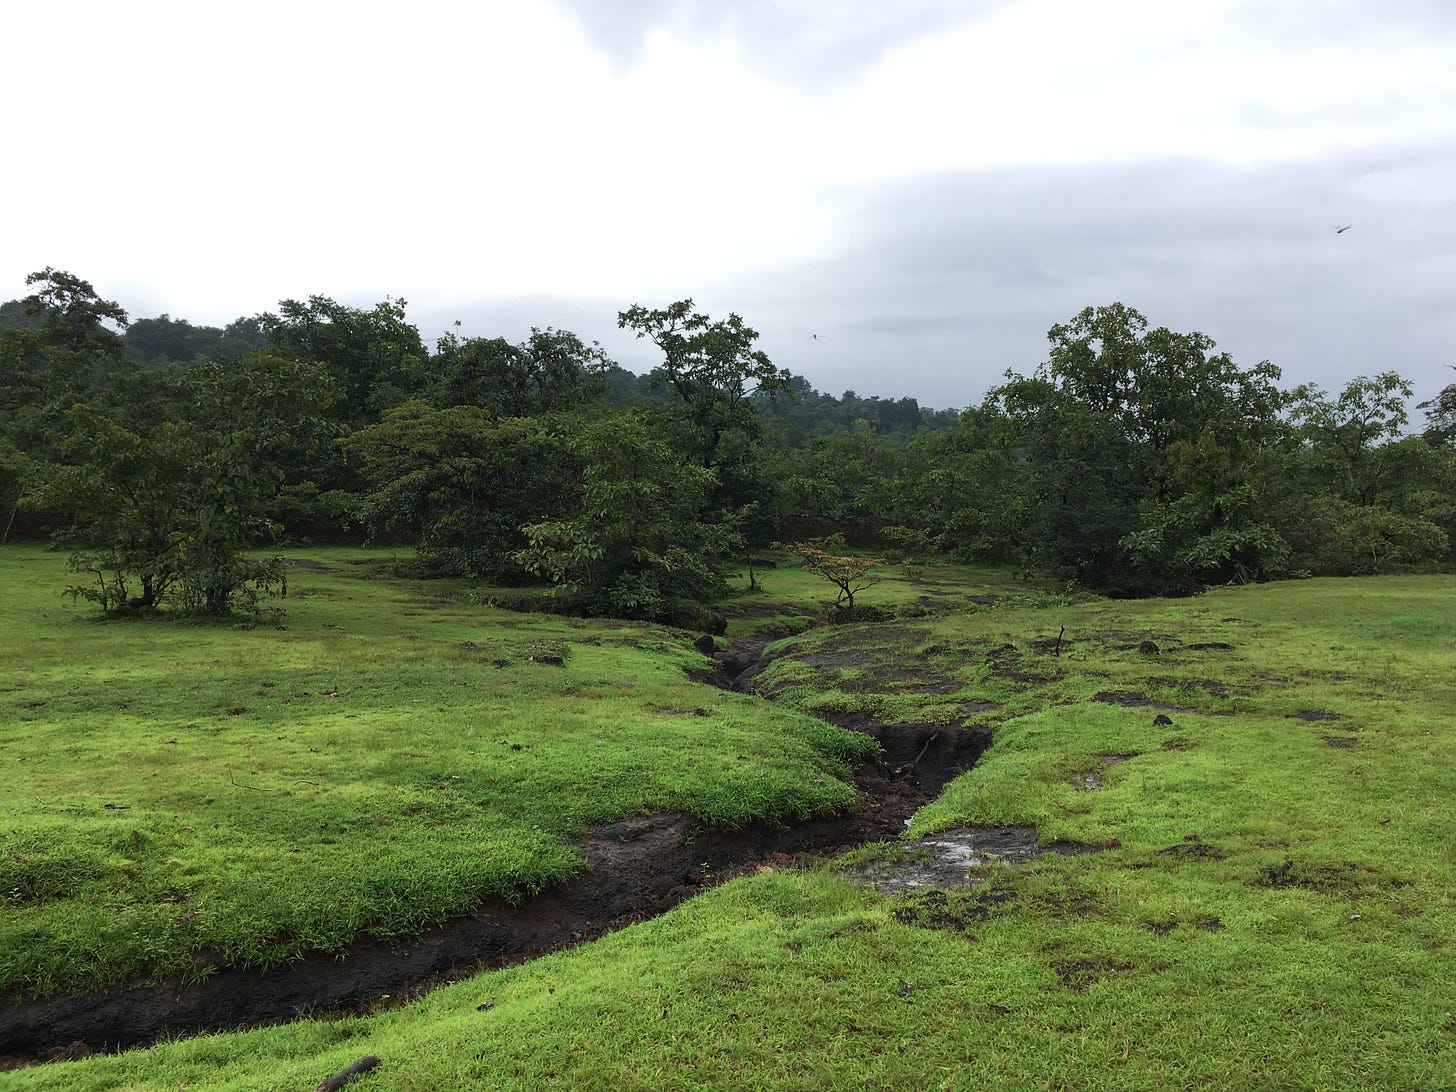 a green grassy lowland is cut through with a small rocky gap, with deeper green trees in the background. the sky is overcast, dull blue with white clouds. 